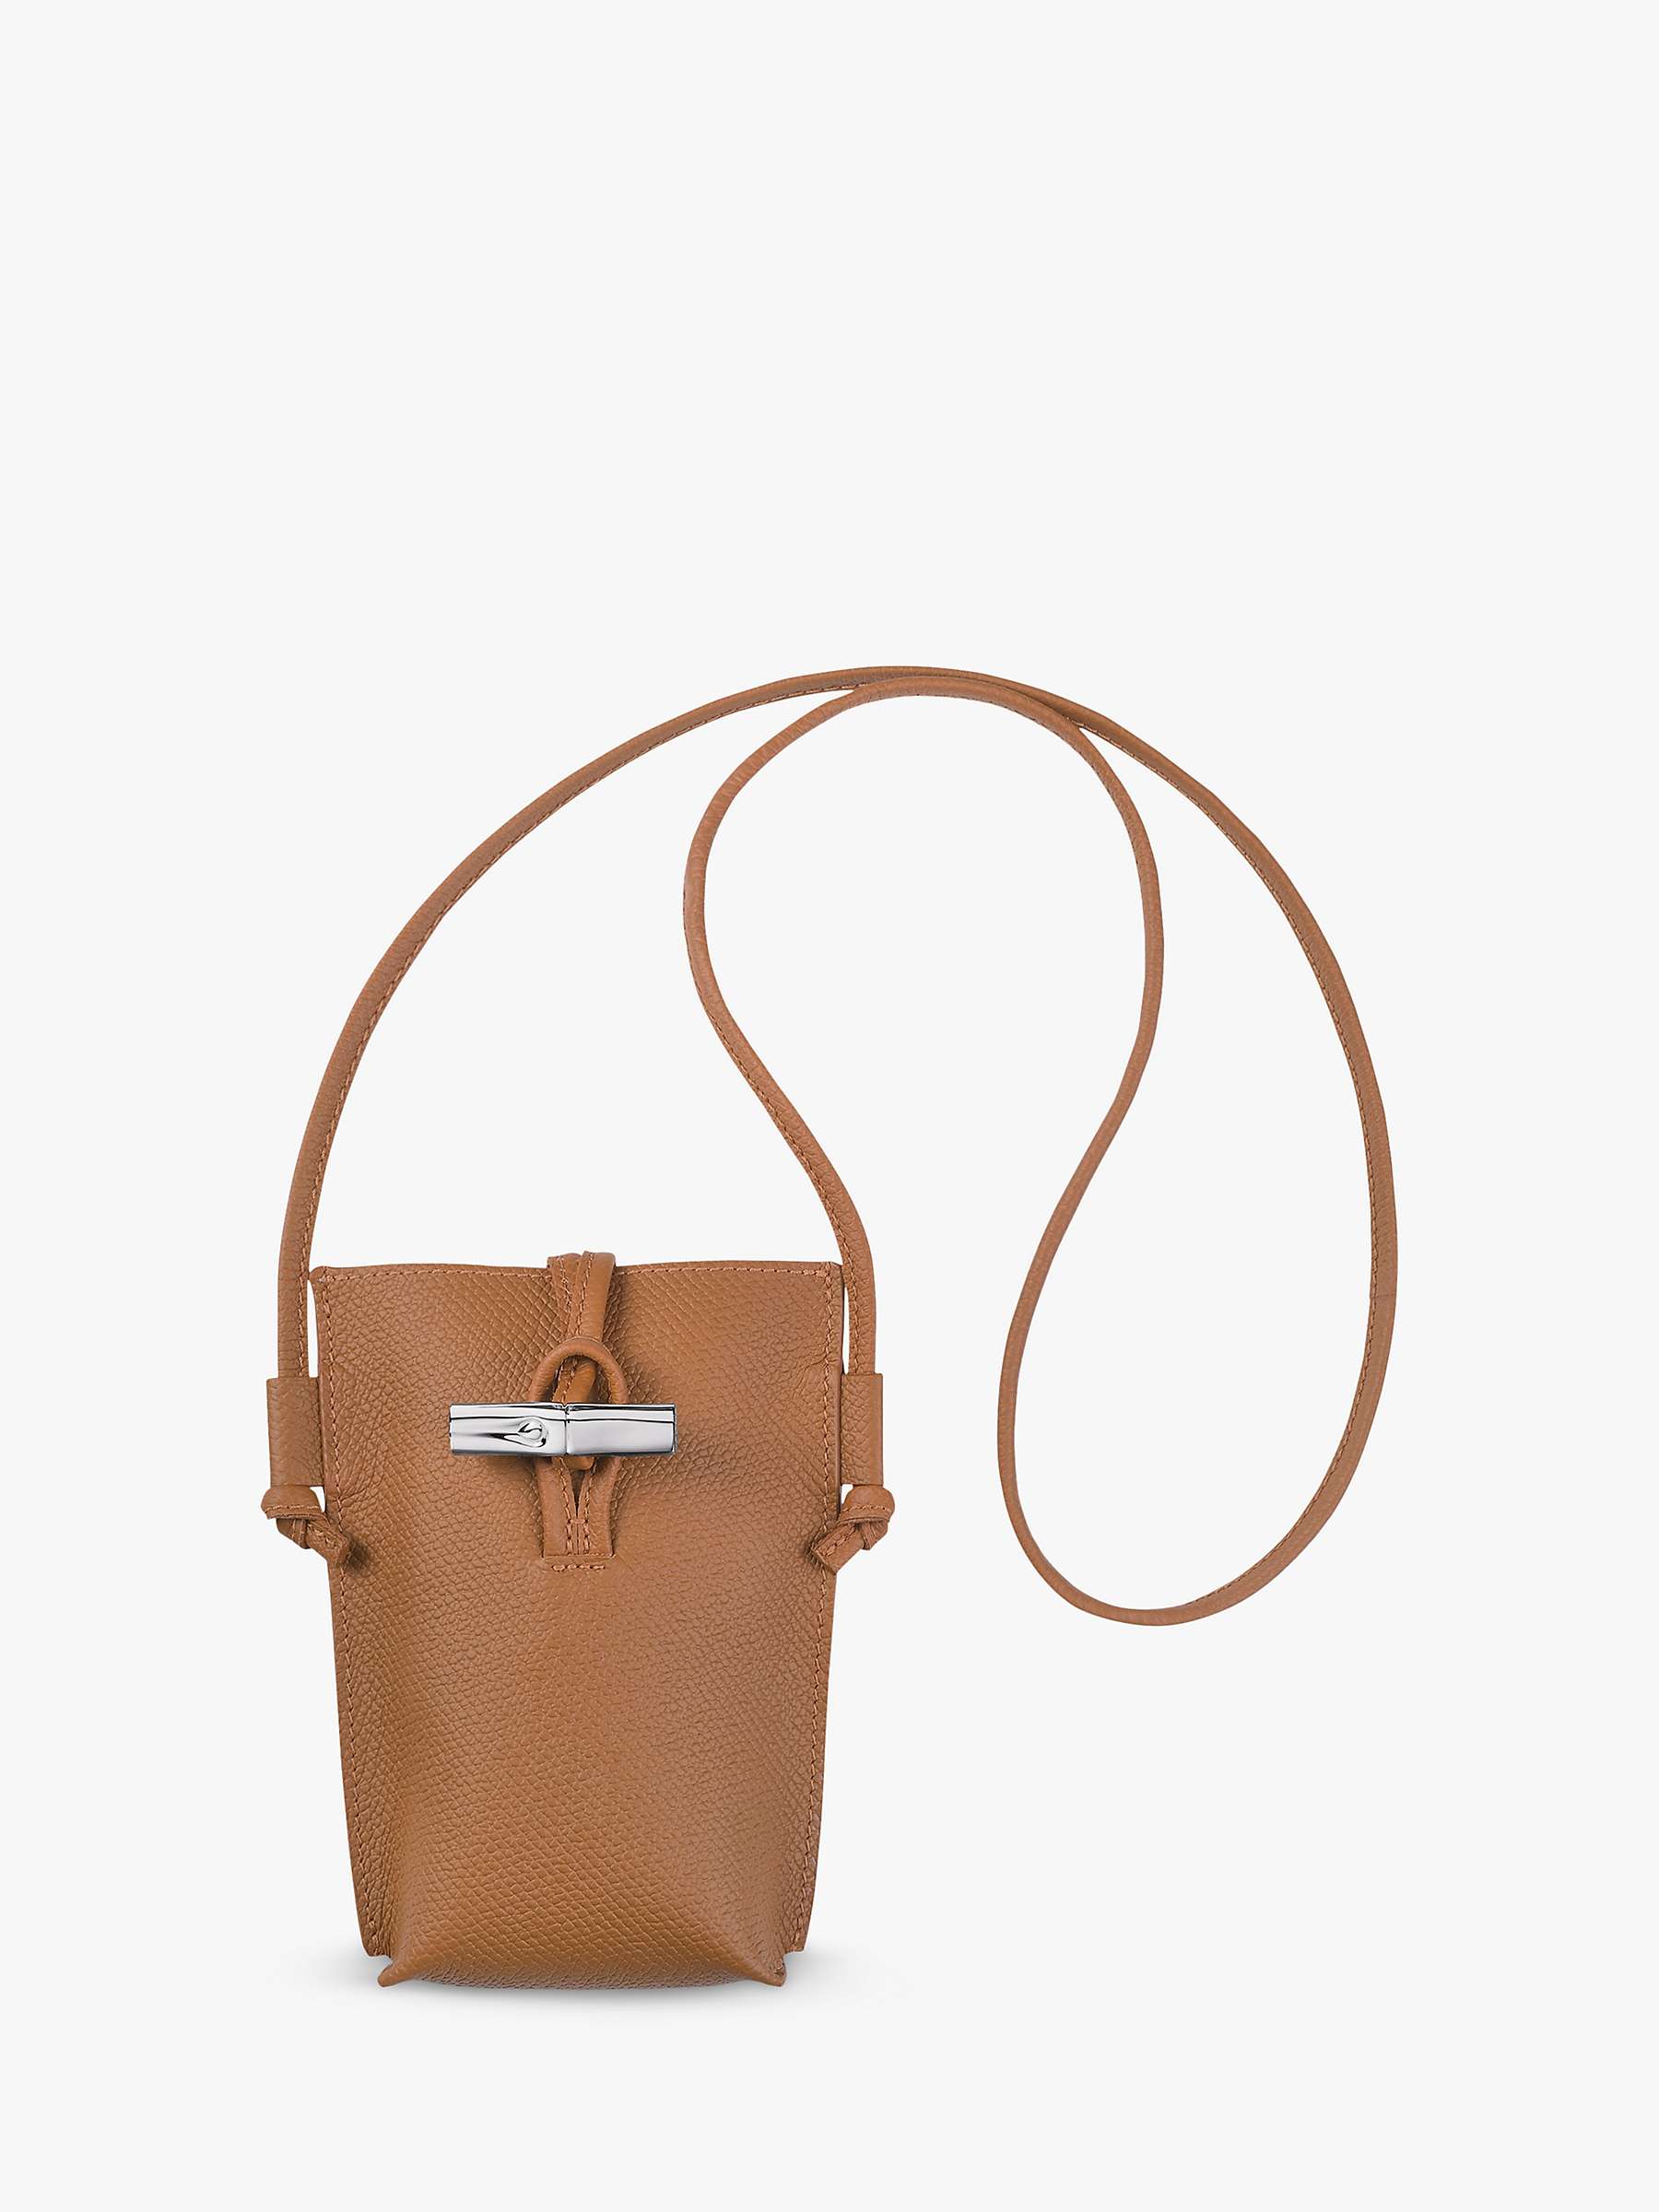 Buy Longchamp Roseau Leather Phone Pouch Bag Online at johnlewis.com